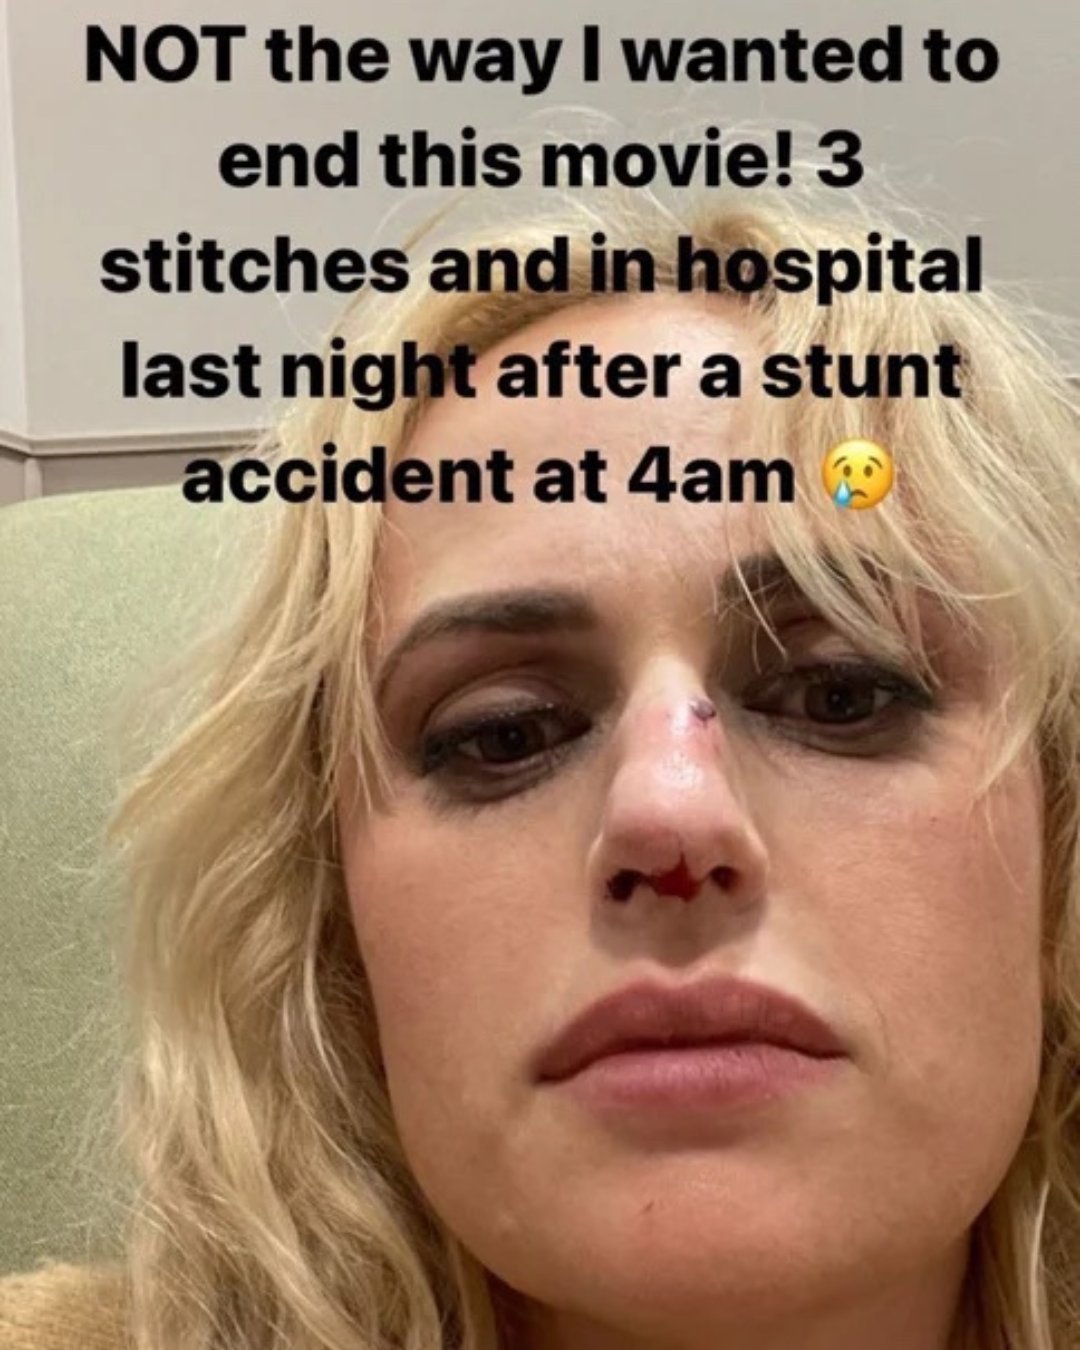 A screenshot of a social media post shows a blonde woman with injuries to her nose. 